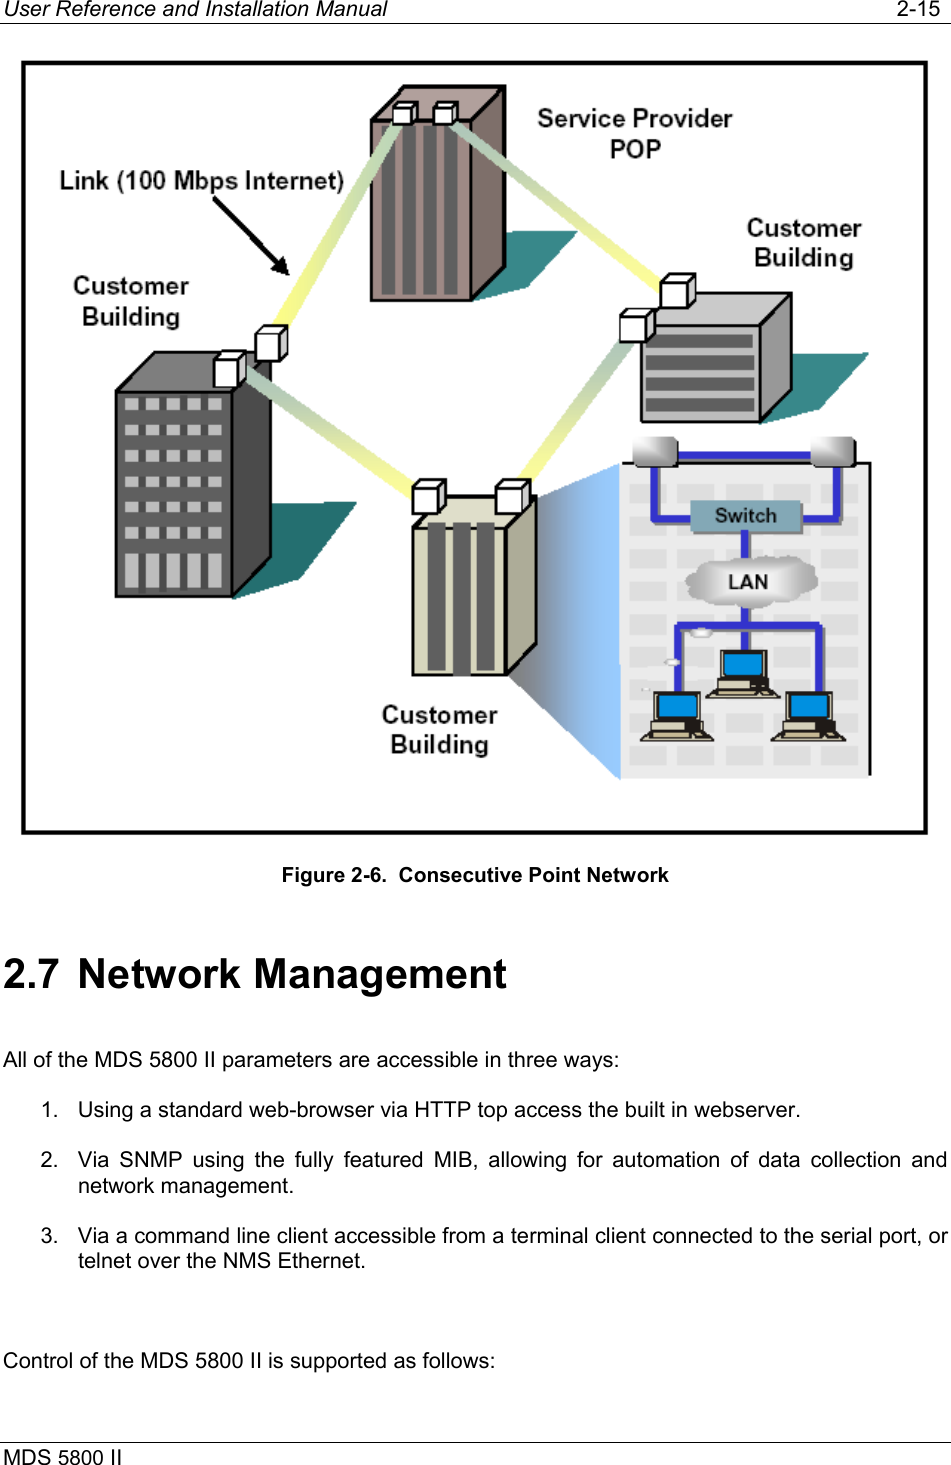 User Reference and Installation Manual   2-15 MDS 5800 II       Figure 2-6.  Consecutive Point Network 2.7 Network Management All of the MDS 5800 II parameters are accessible in three ways: 1.  Using a standard web-browser via HTTP top access the built in webserver. 2.  Via SNMP using the fully featured MIB, allowing for automation of data collection and network management. 3.  Via a command line client accessible from a terminal client connected to the serial port, or telnet over the NMS Ethernet.  Control of the MDS 5800 II is supported as follows: 